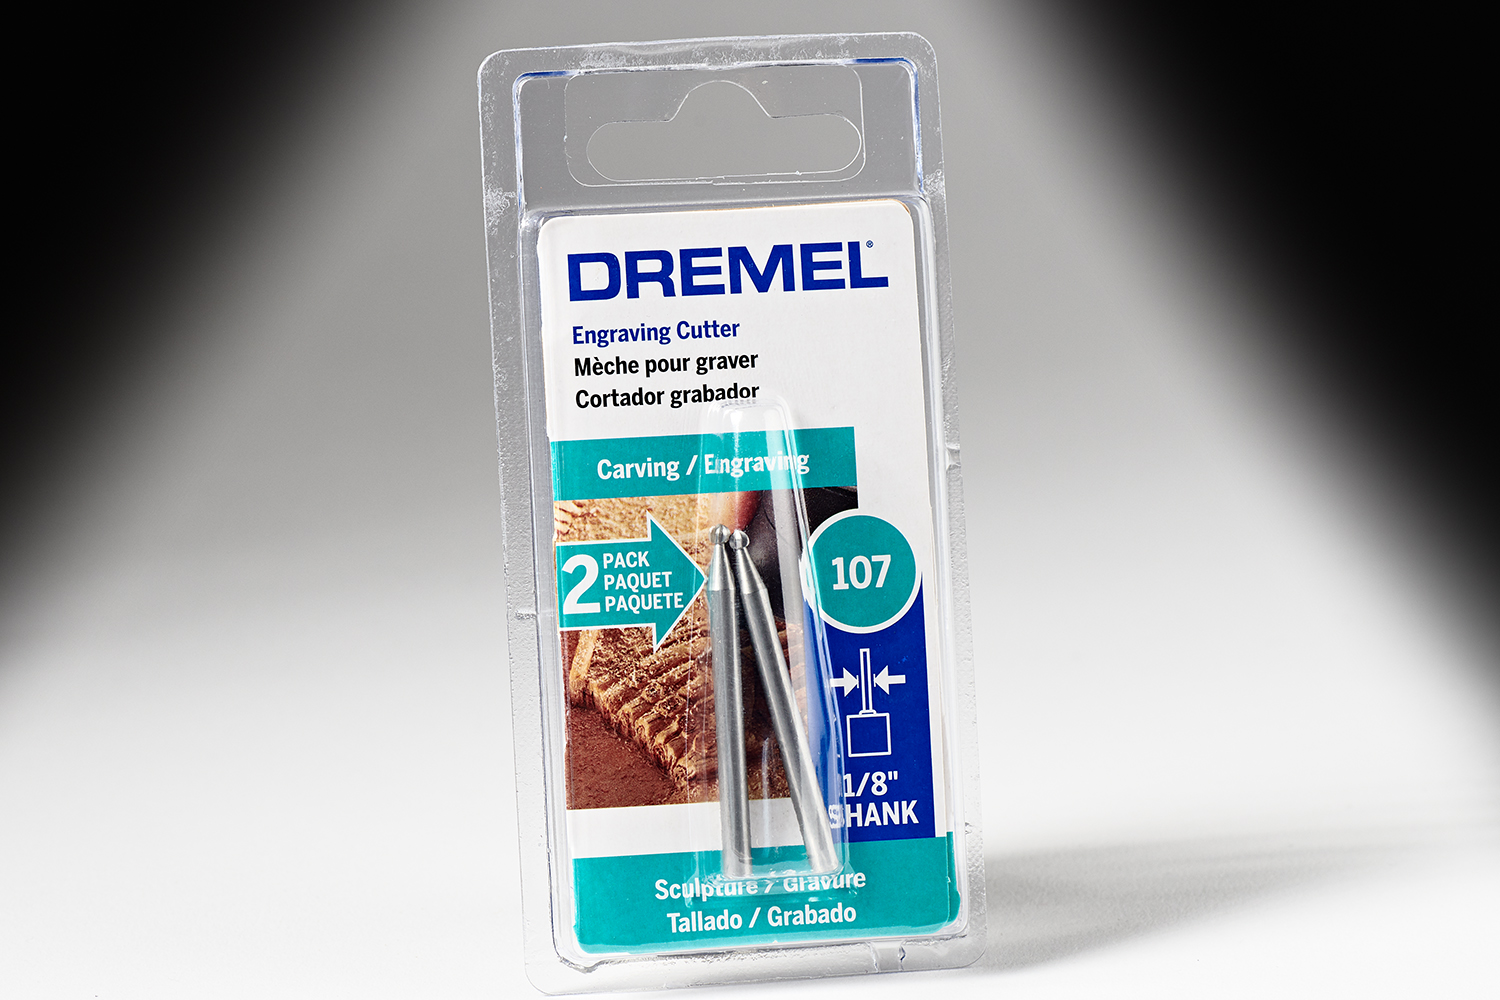 Dremel accessory chart and code as to what each is used for.